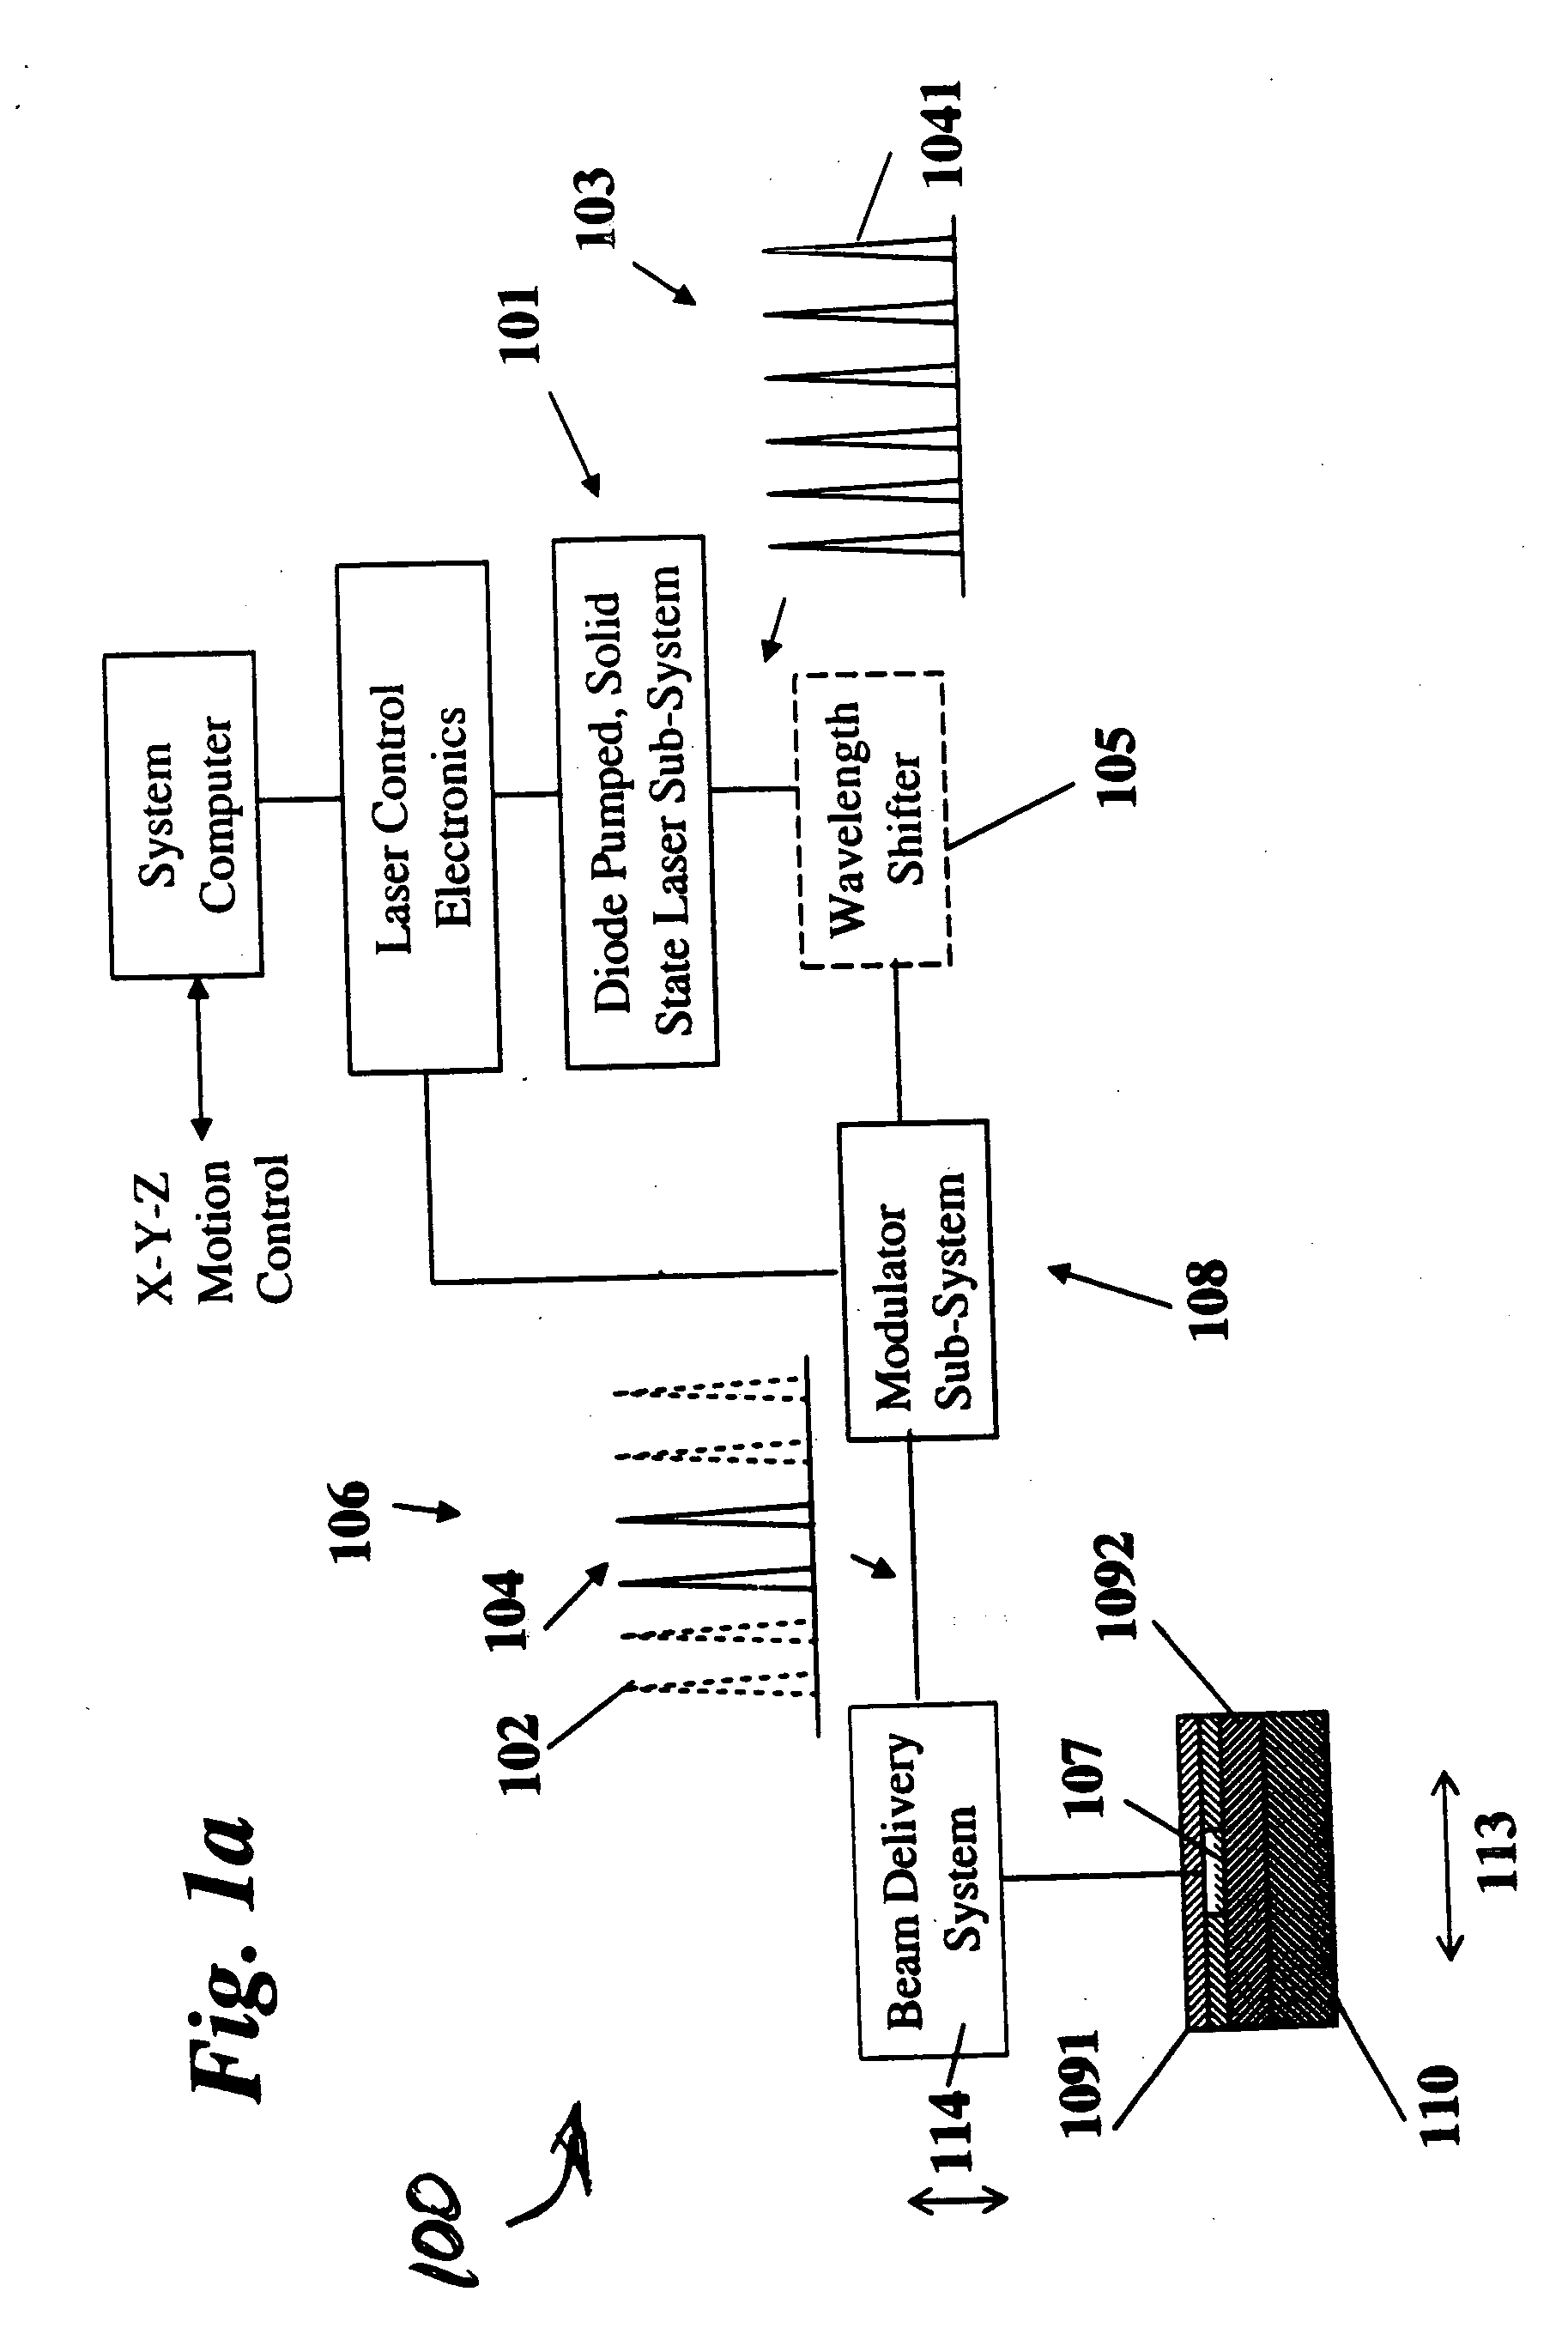 Laser-based method and system for memory link processing with picosecond lasers